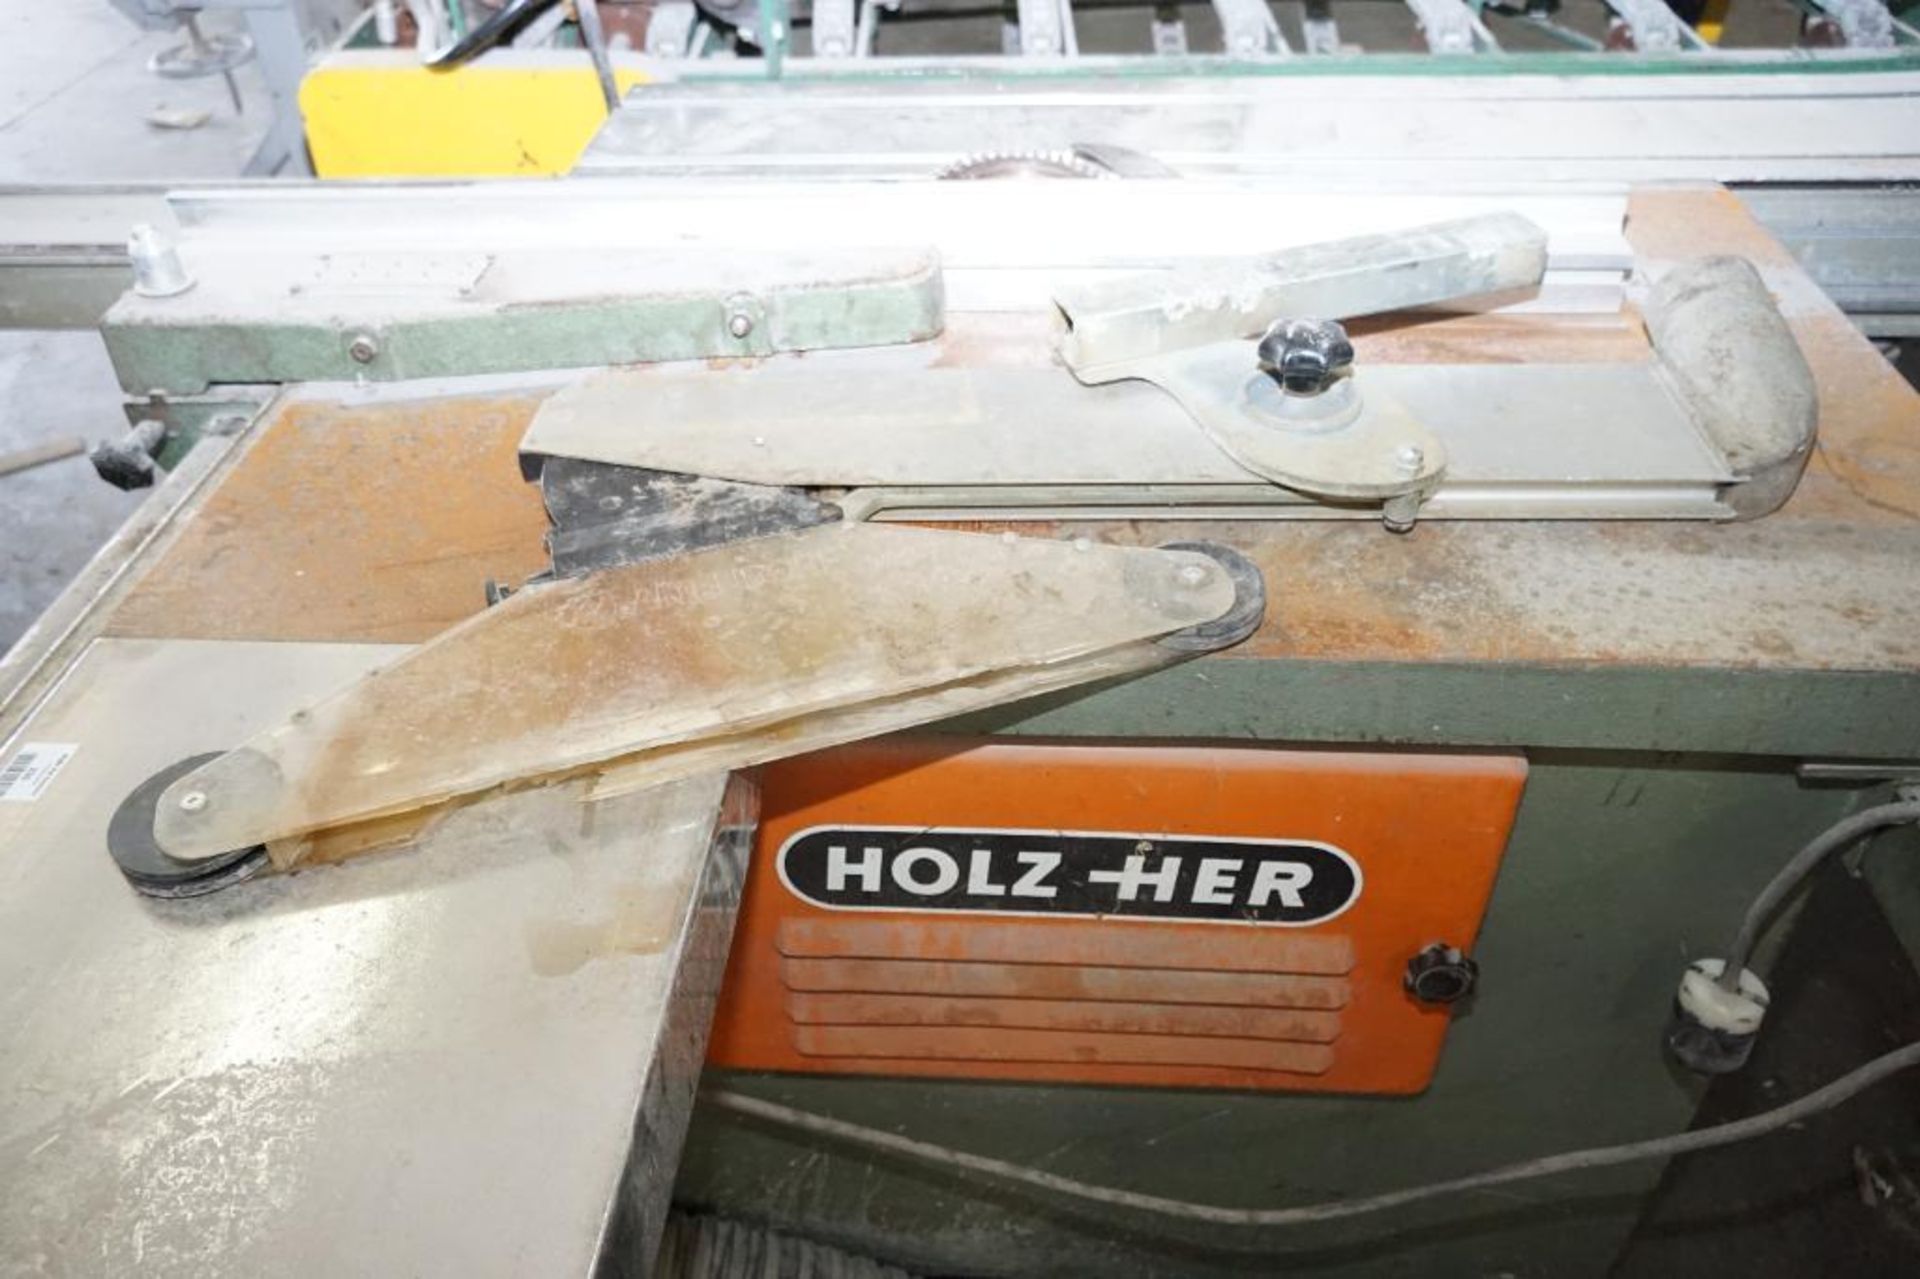 9' Holtz-Her Sliding Table Saw - Image 11 of 13